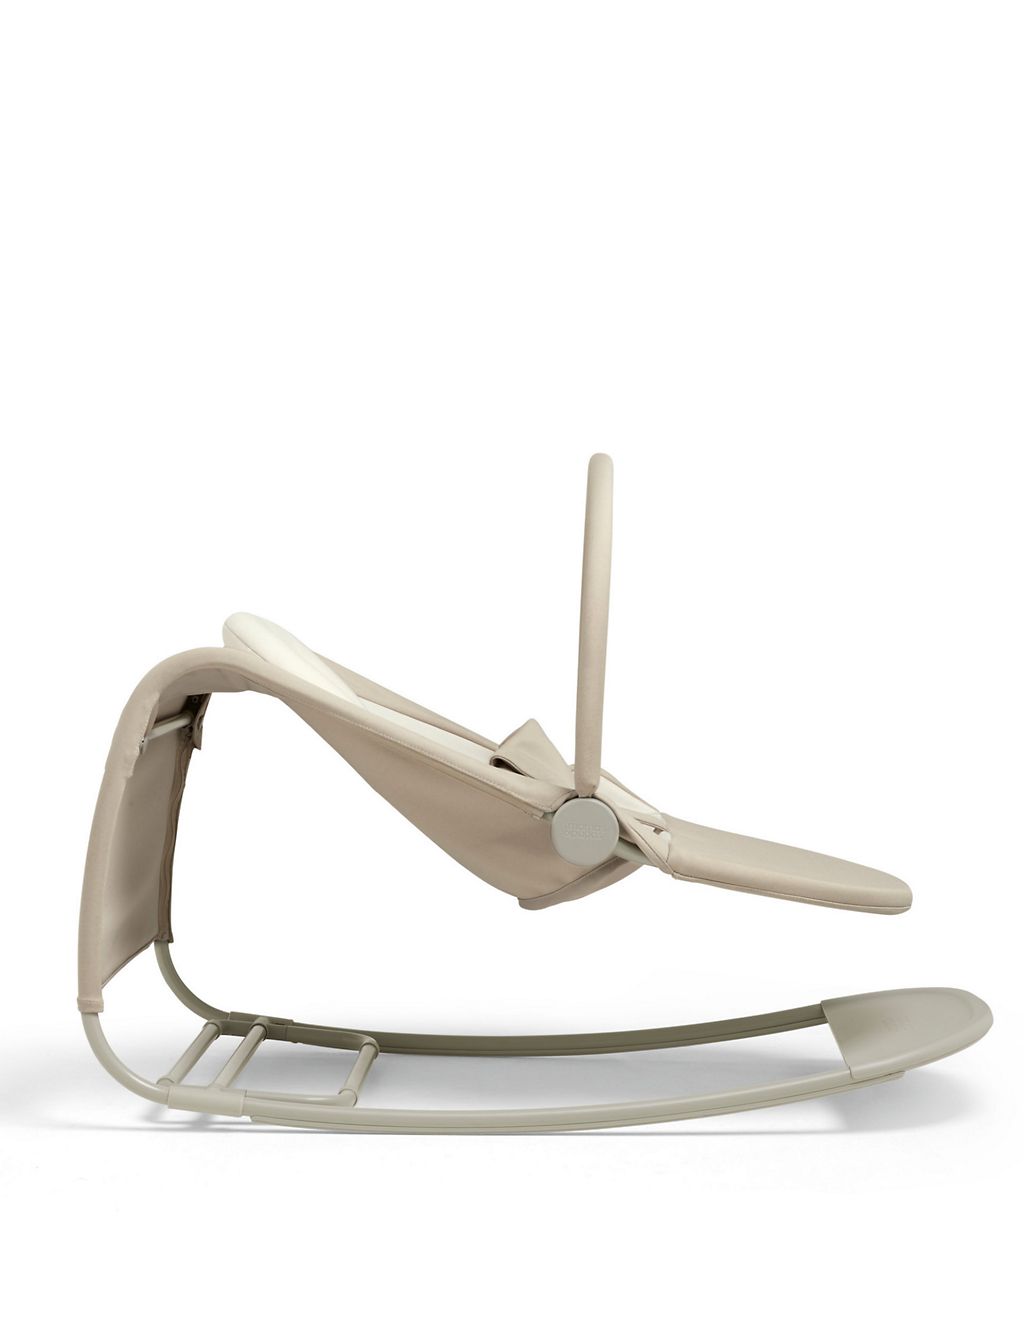 Tempo 3-in-1 Rocker Ivy Bouncer 4 of 9